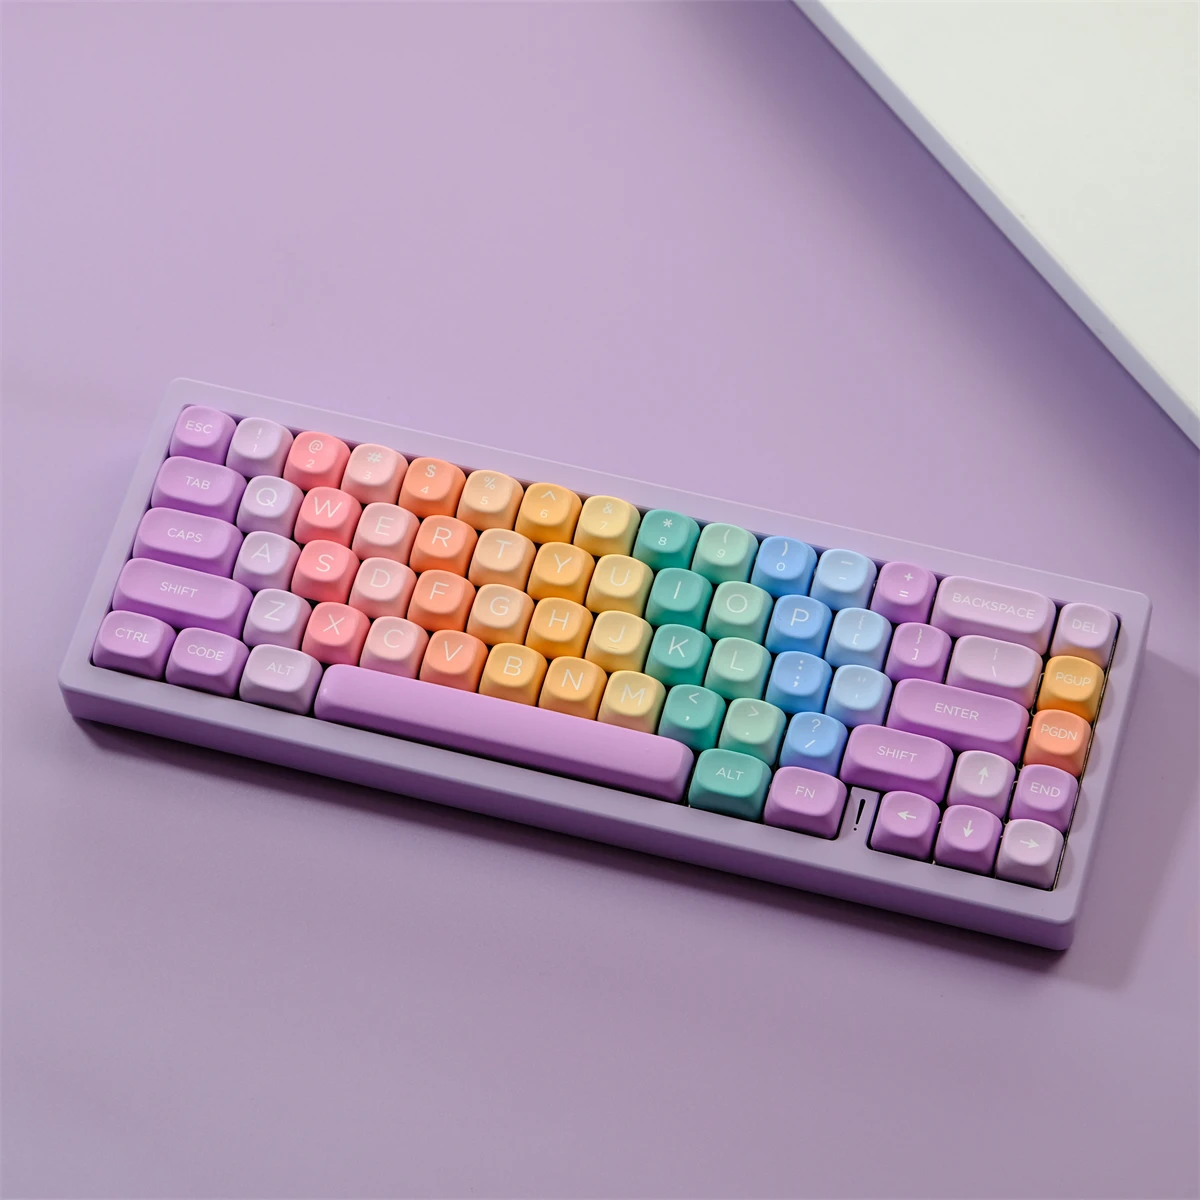 126 Keys Soft Candy Gradient Colors Keycaps Dye Sublimation MOA Profile PBT Keycaps For MX Switches Mechanical Keyboard Key Caps